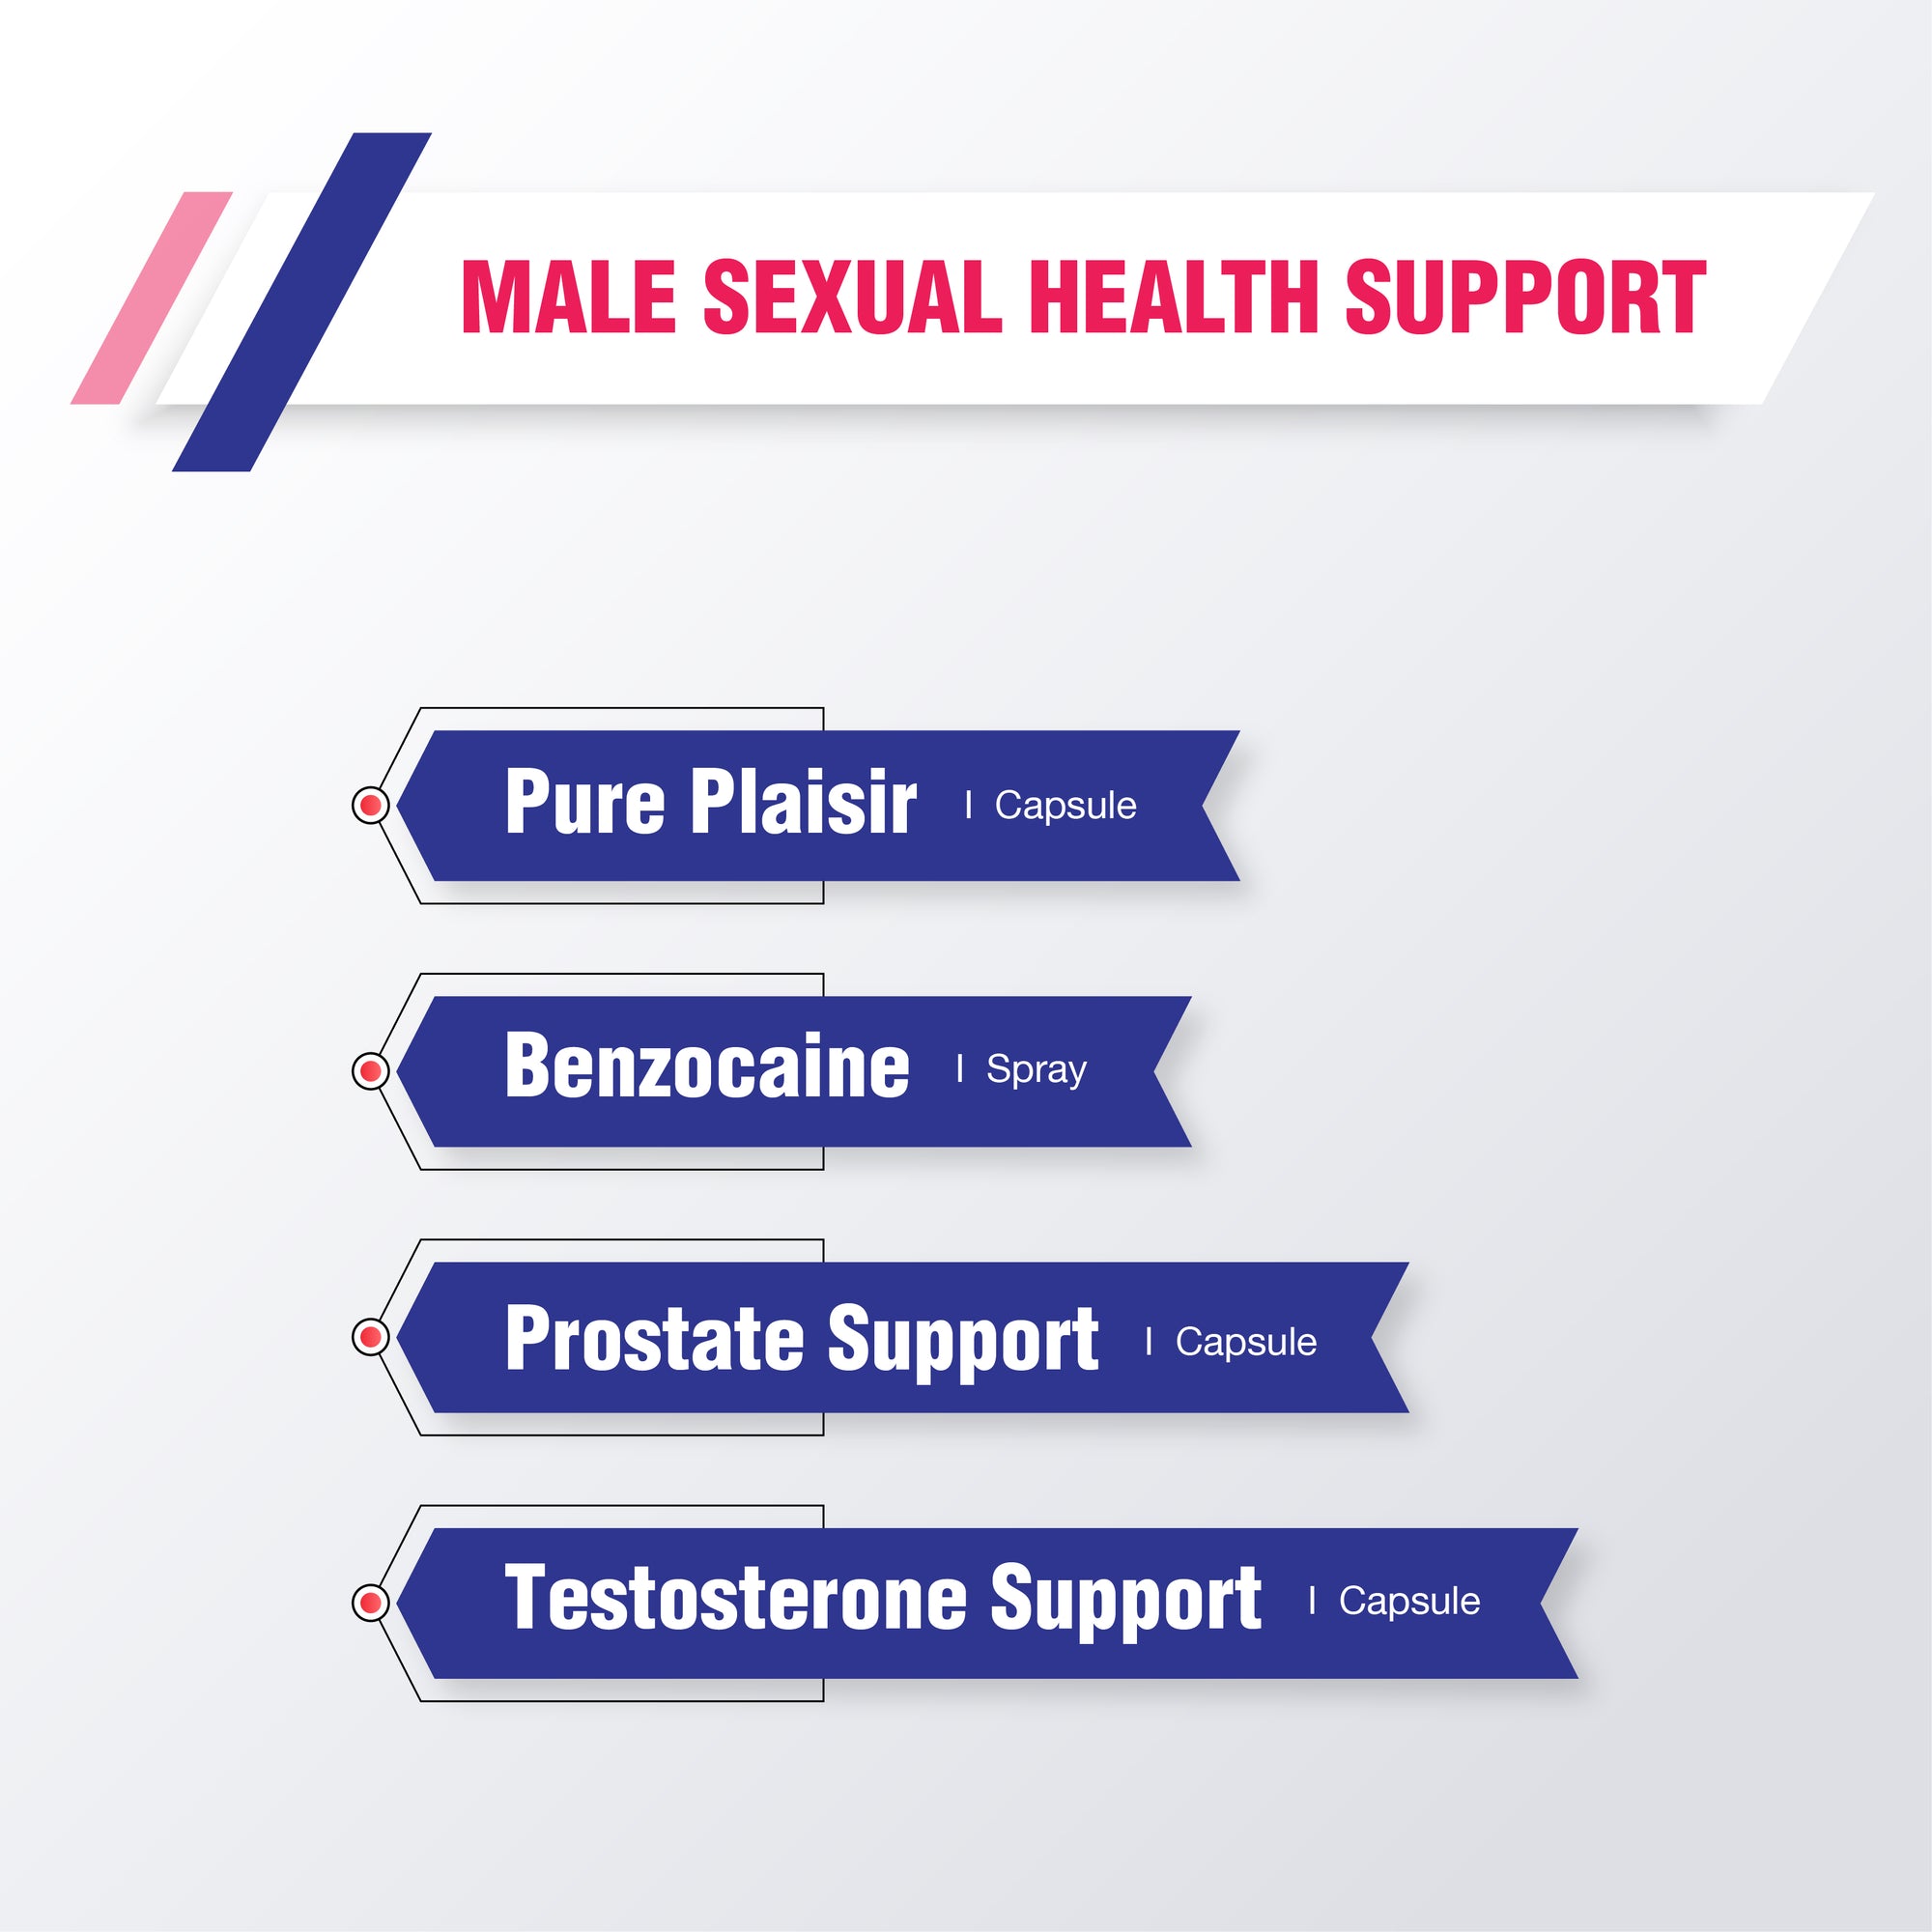 Male sexual health support